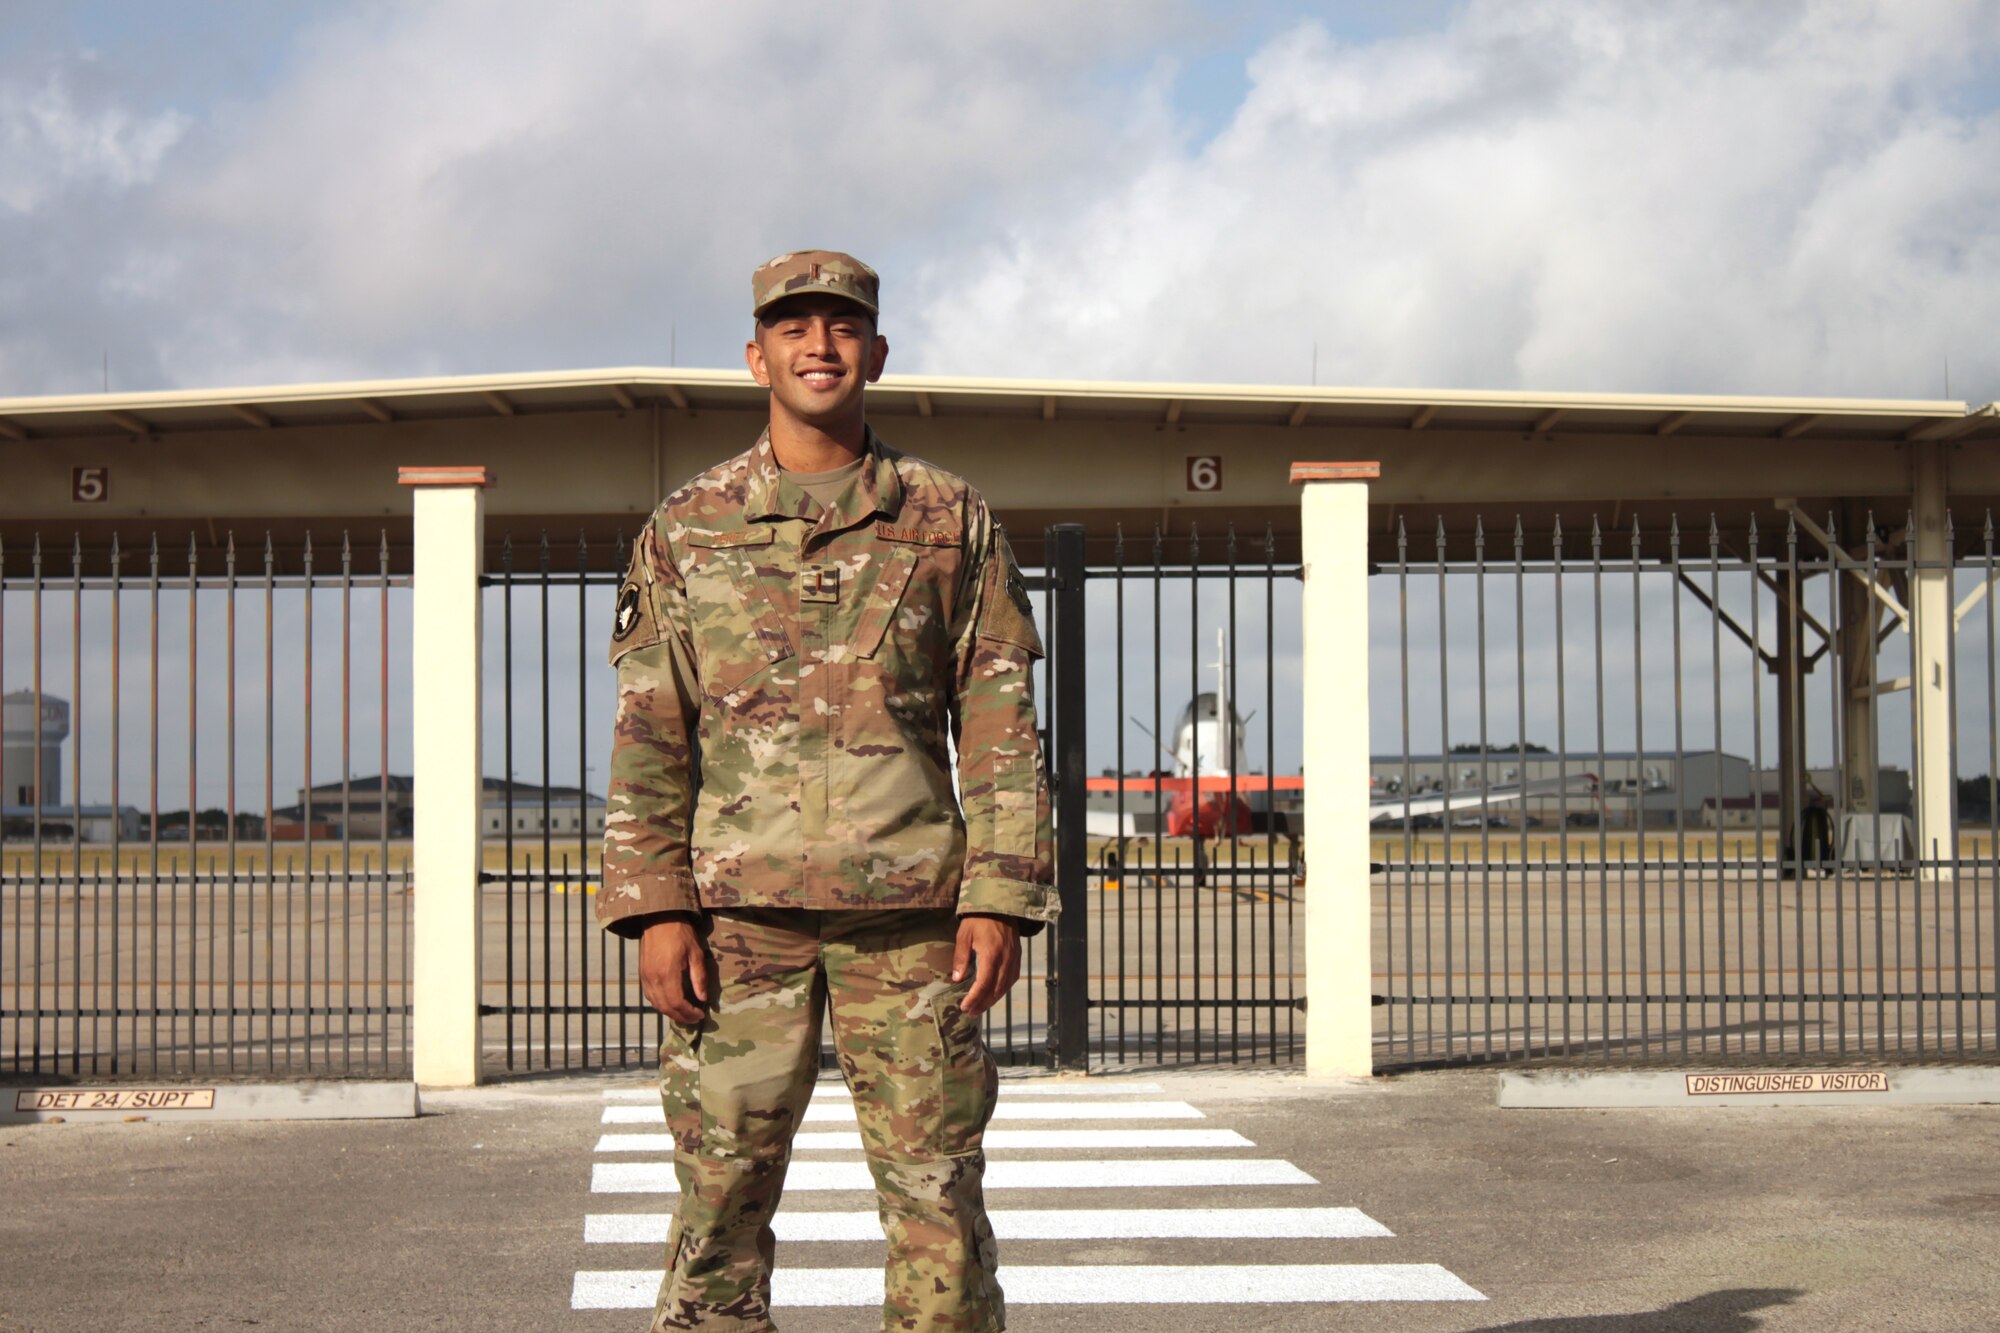 U.S. Air Force 2nd Lt. Isaac Perez stands outside the flight line at Joint Base San Antonio-Randolph 24 Aug. 20, 2019. Perez, who is awaiting the start of version three of “Pilot Training Next,” was the 2019 winner of the Intercollegiate Tennis Association’s national Arthur Ashe Jr. Leadership and Sportsmanship award. (U.S. Air Force photo by 2nd Lt. Robert Guest)